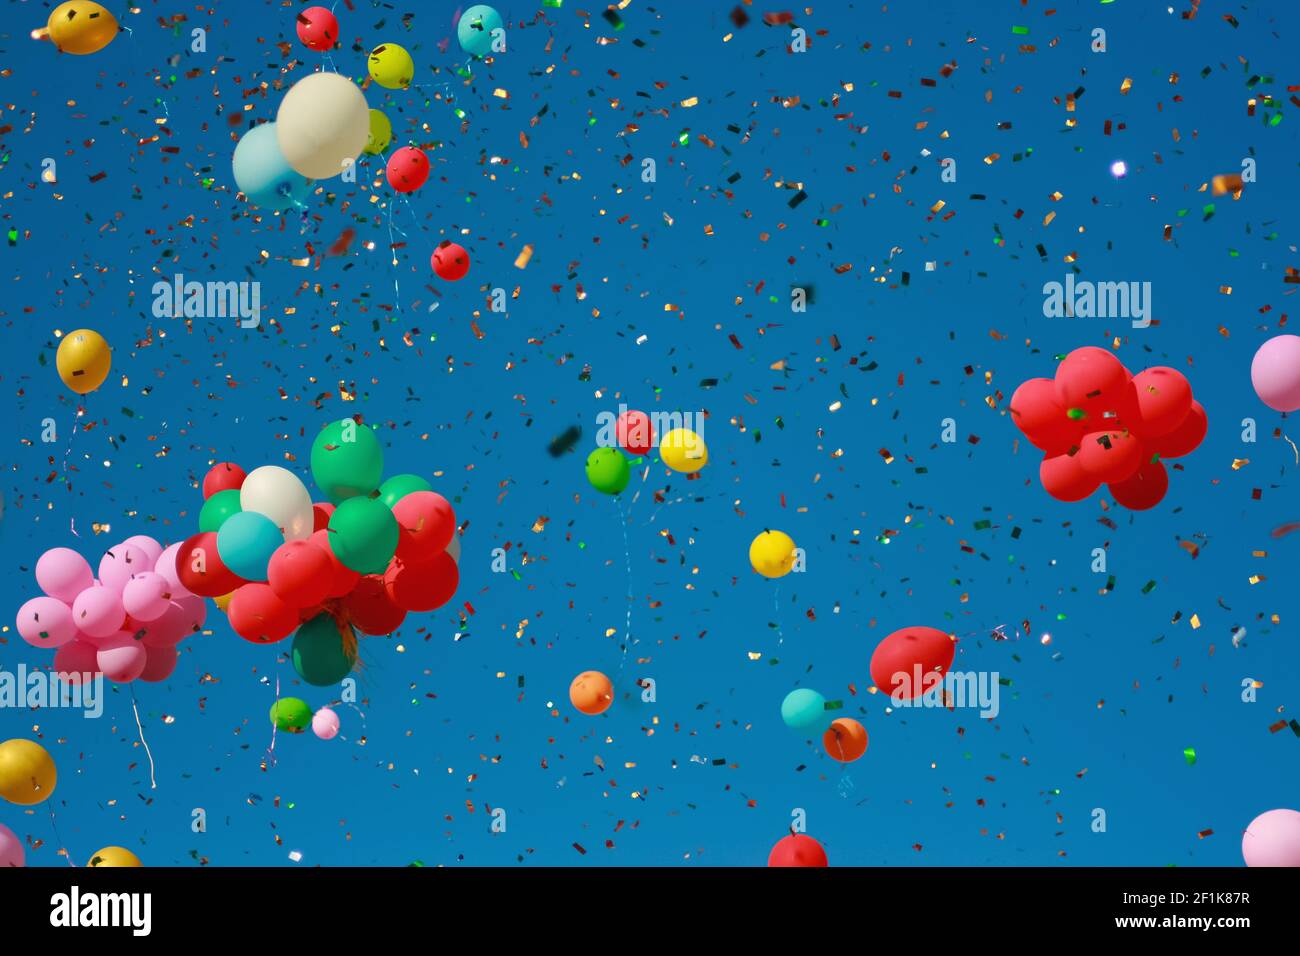 Multicolored glitter balloons launched into the blue sky. Celebration, birthday, balloons with helium. Stock Photo